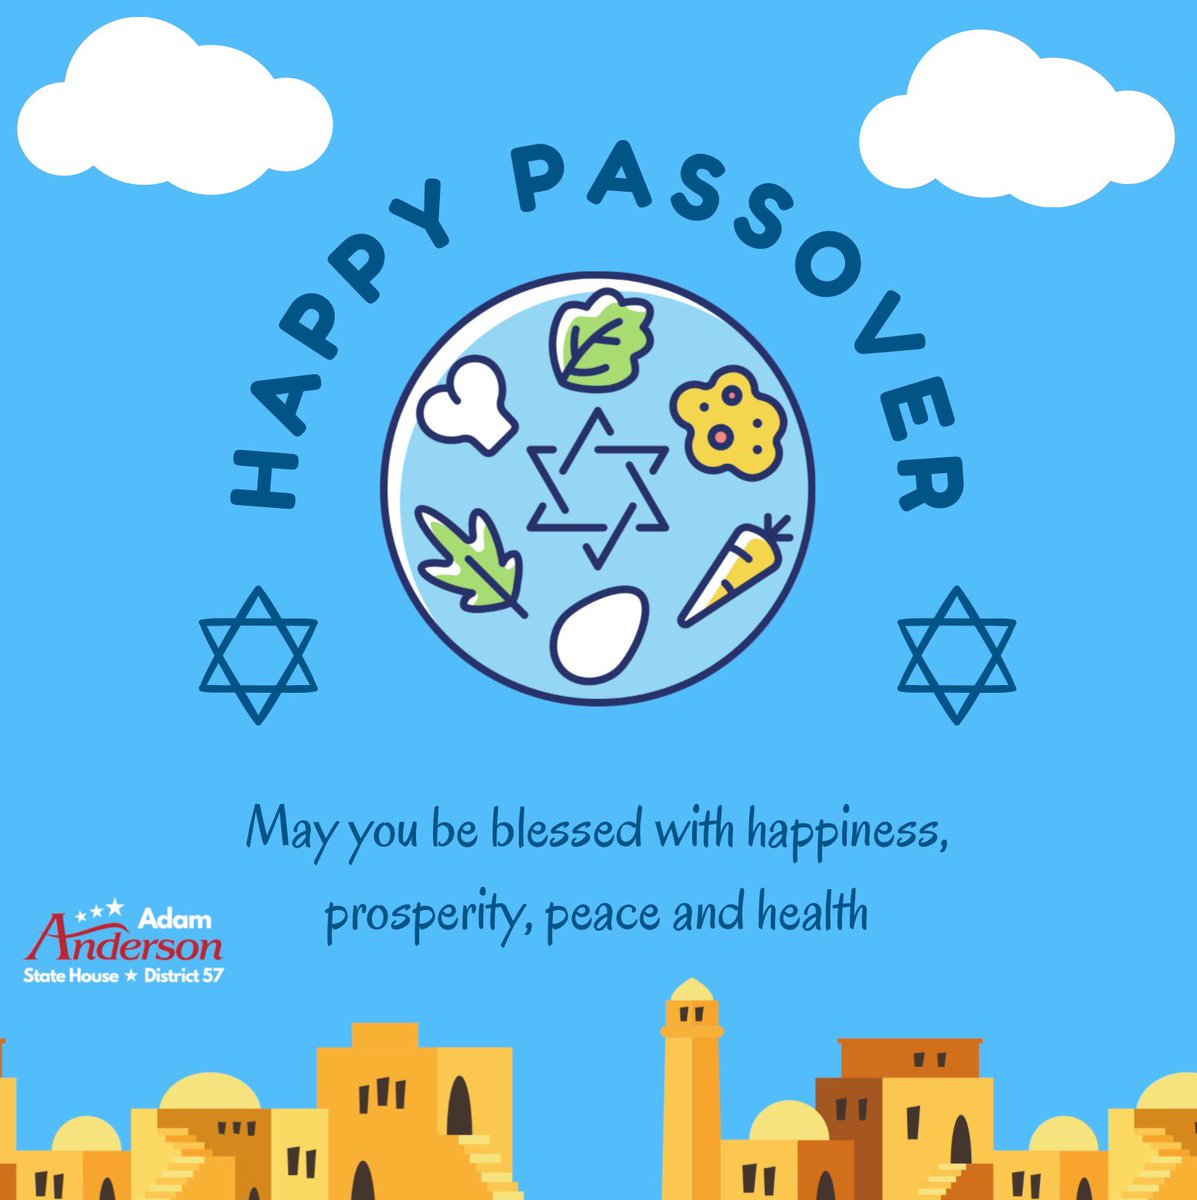 As the Jewish holiday begins, let us all remember the story of Passover and the meaning of freedom in listening to the Haggadah. Let us rejoice in the traditions of Passover together! Chag Sameach!🇮🇱🇺🇸🙏